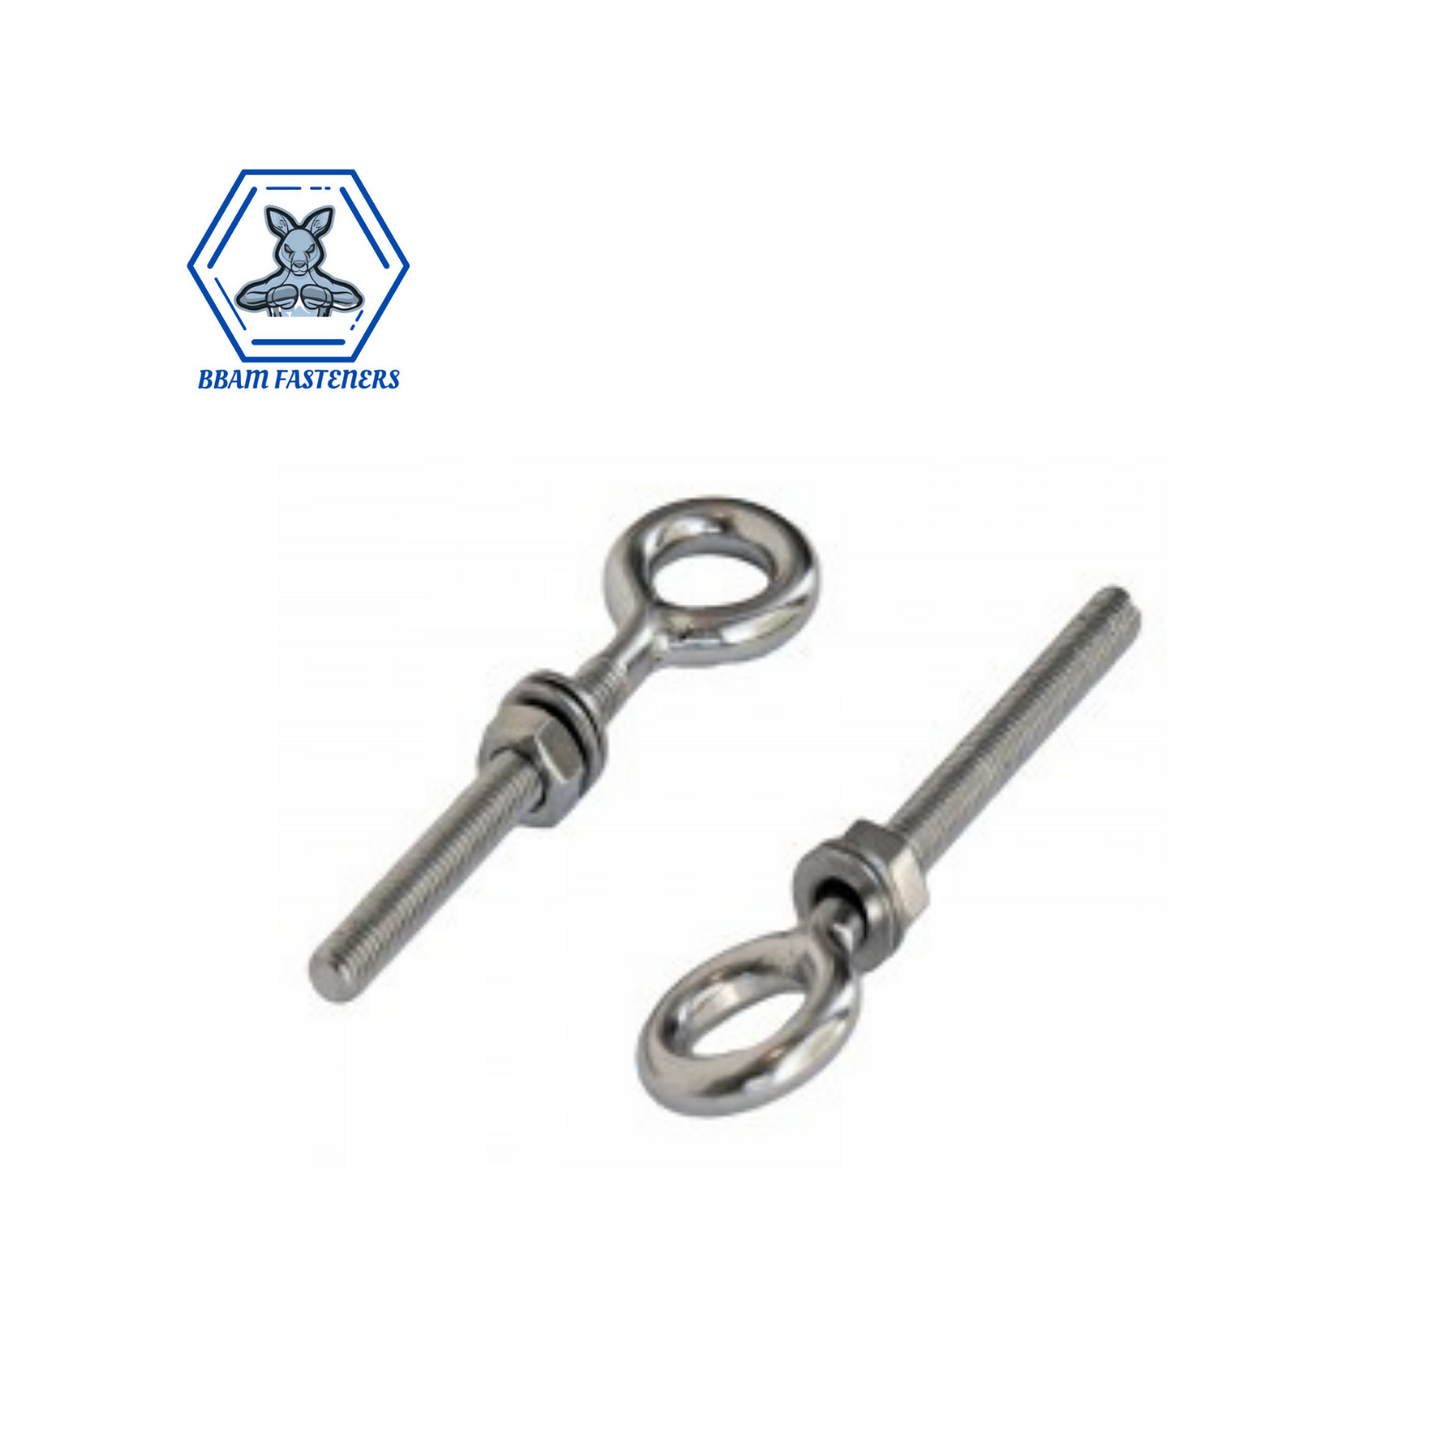 M10 x 120mm Eyebolt with Nut & Washer Stainless Steel